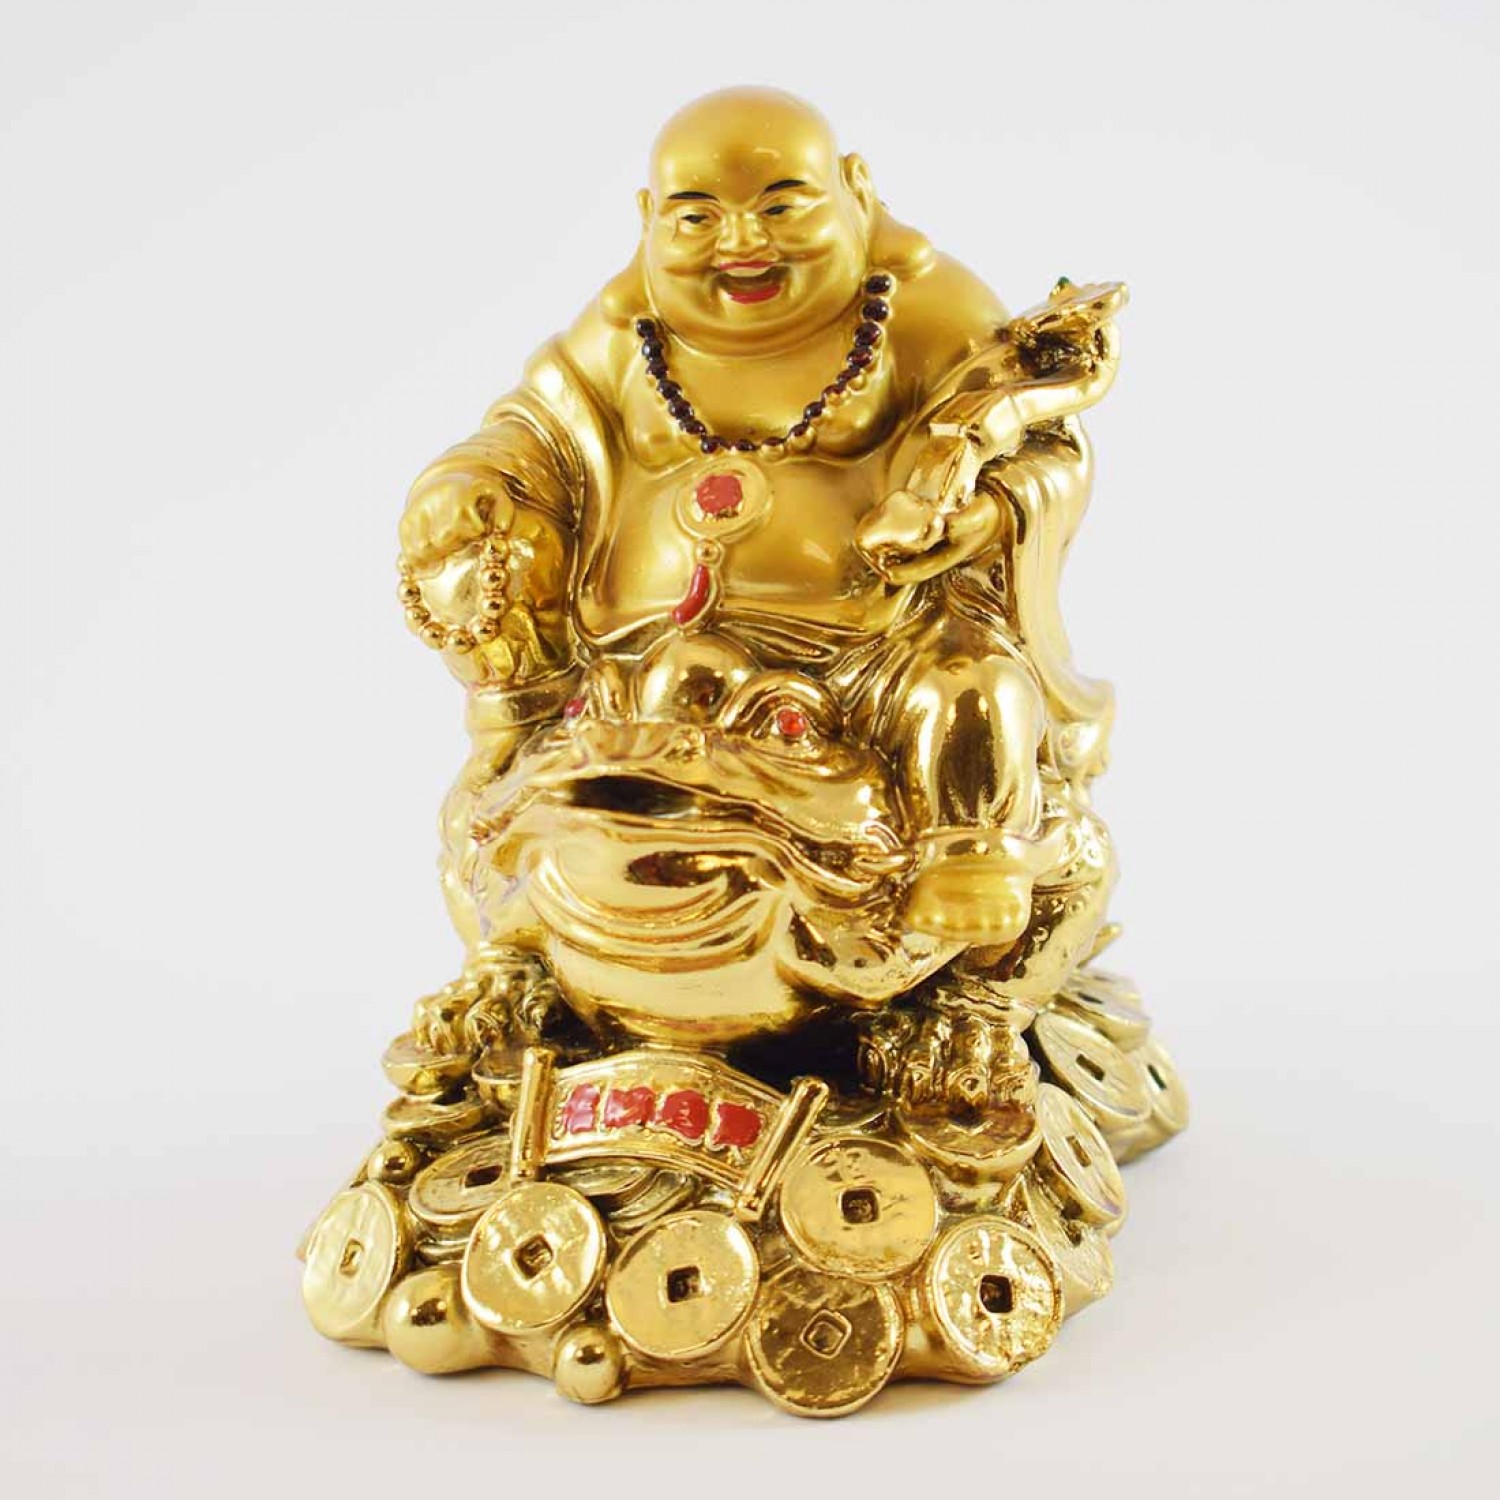 Handmade Golden Laughing Buddha Riding On Money Frog Sitting On A Bed ...